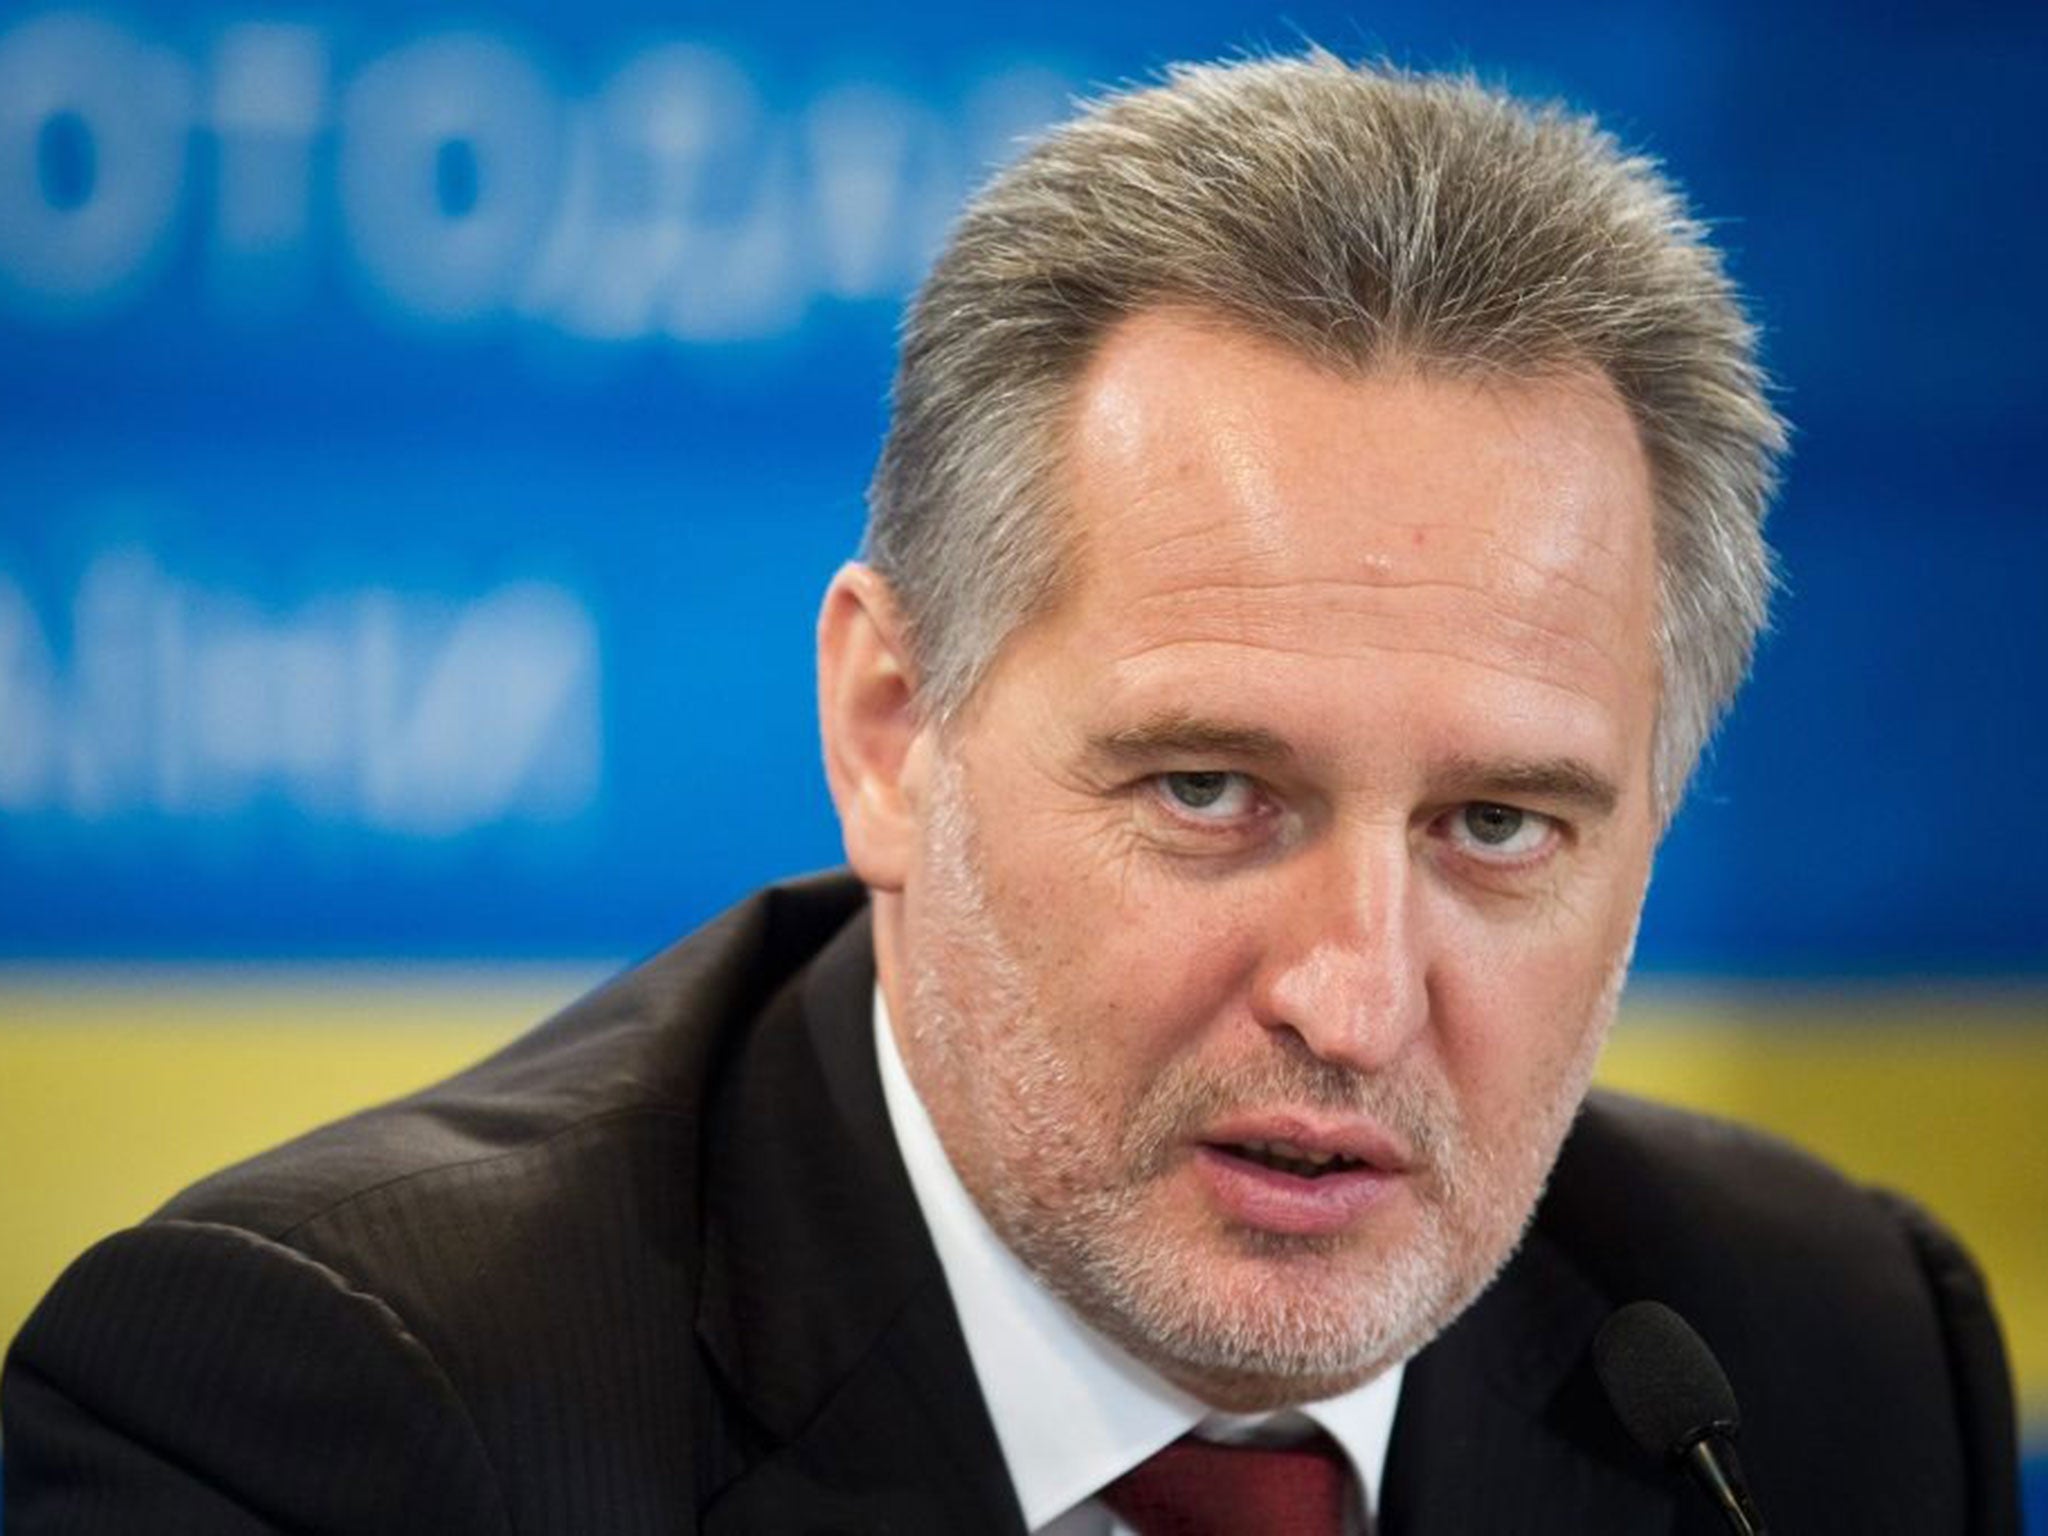 Dmitry Firtash has been arrested in Vienna at the request of the United States following an FBI investigation